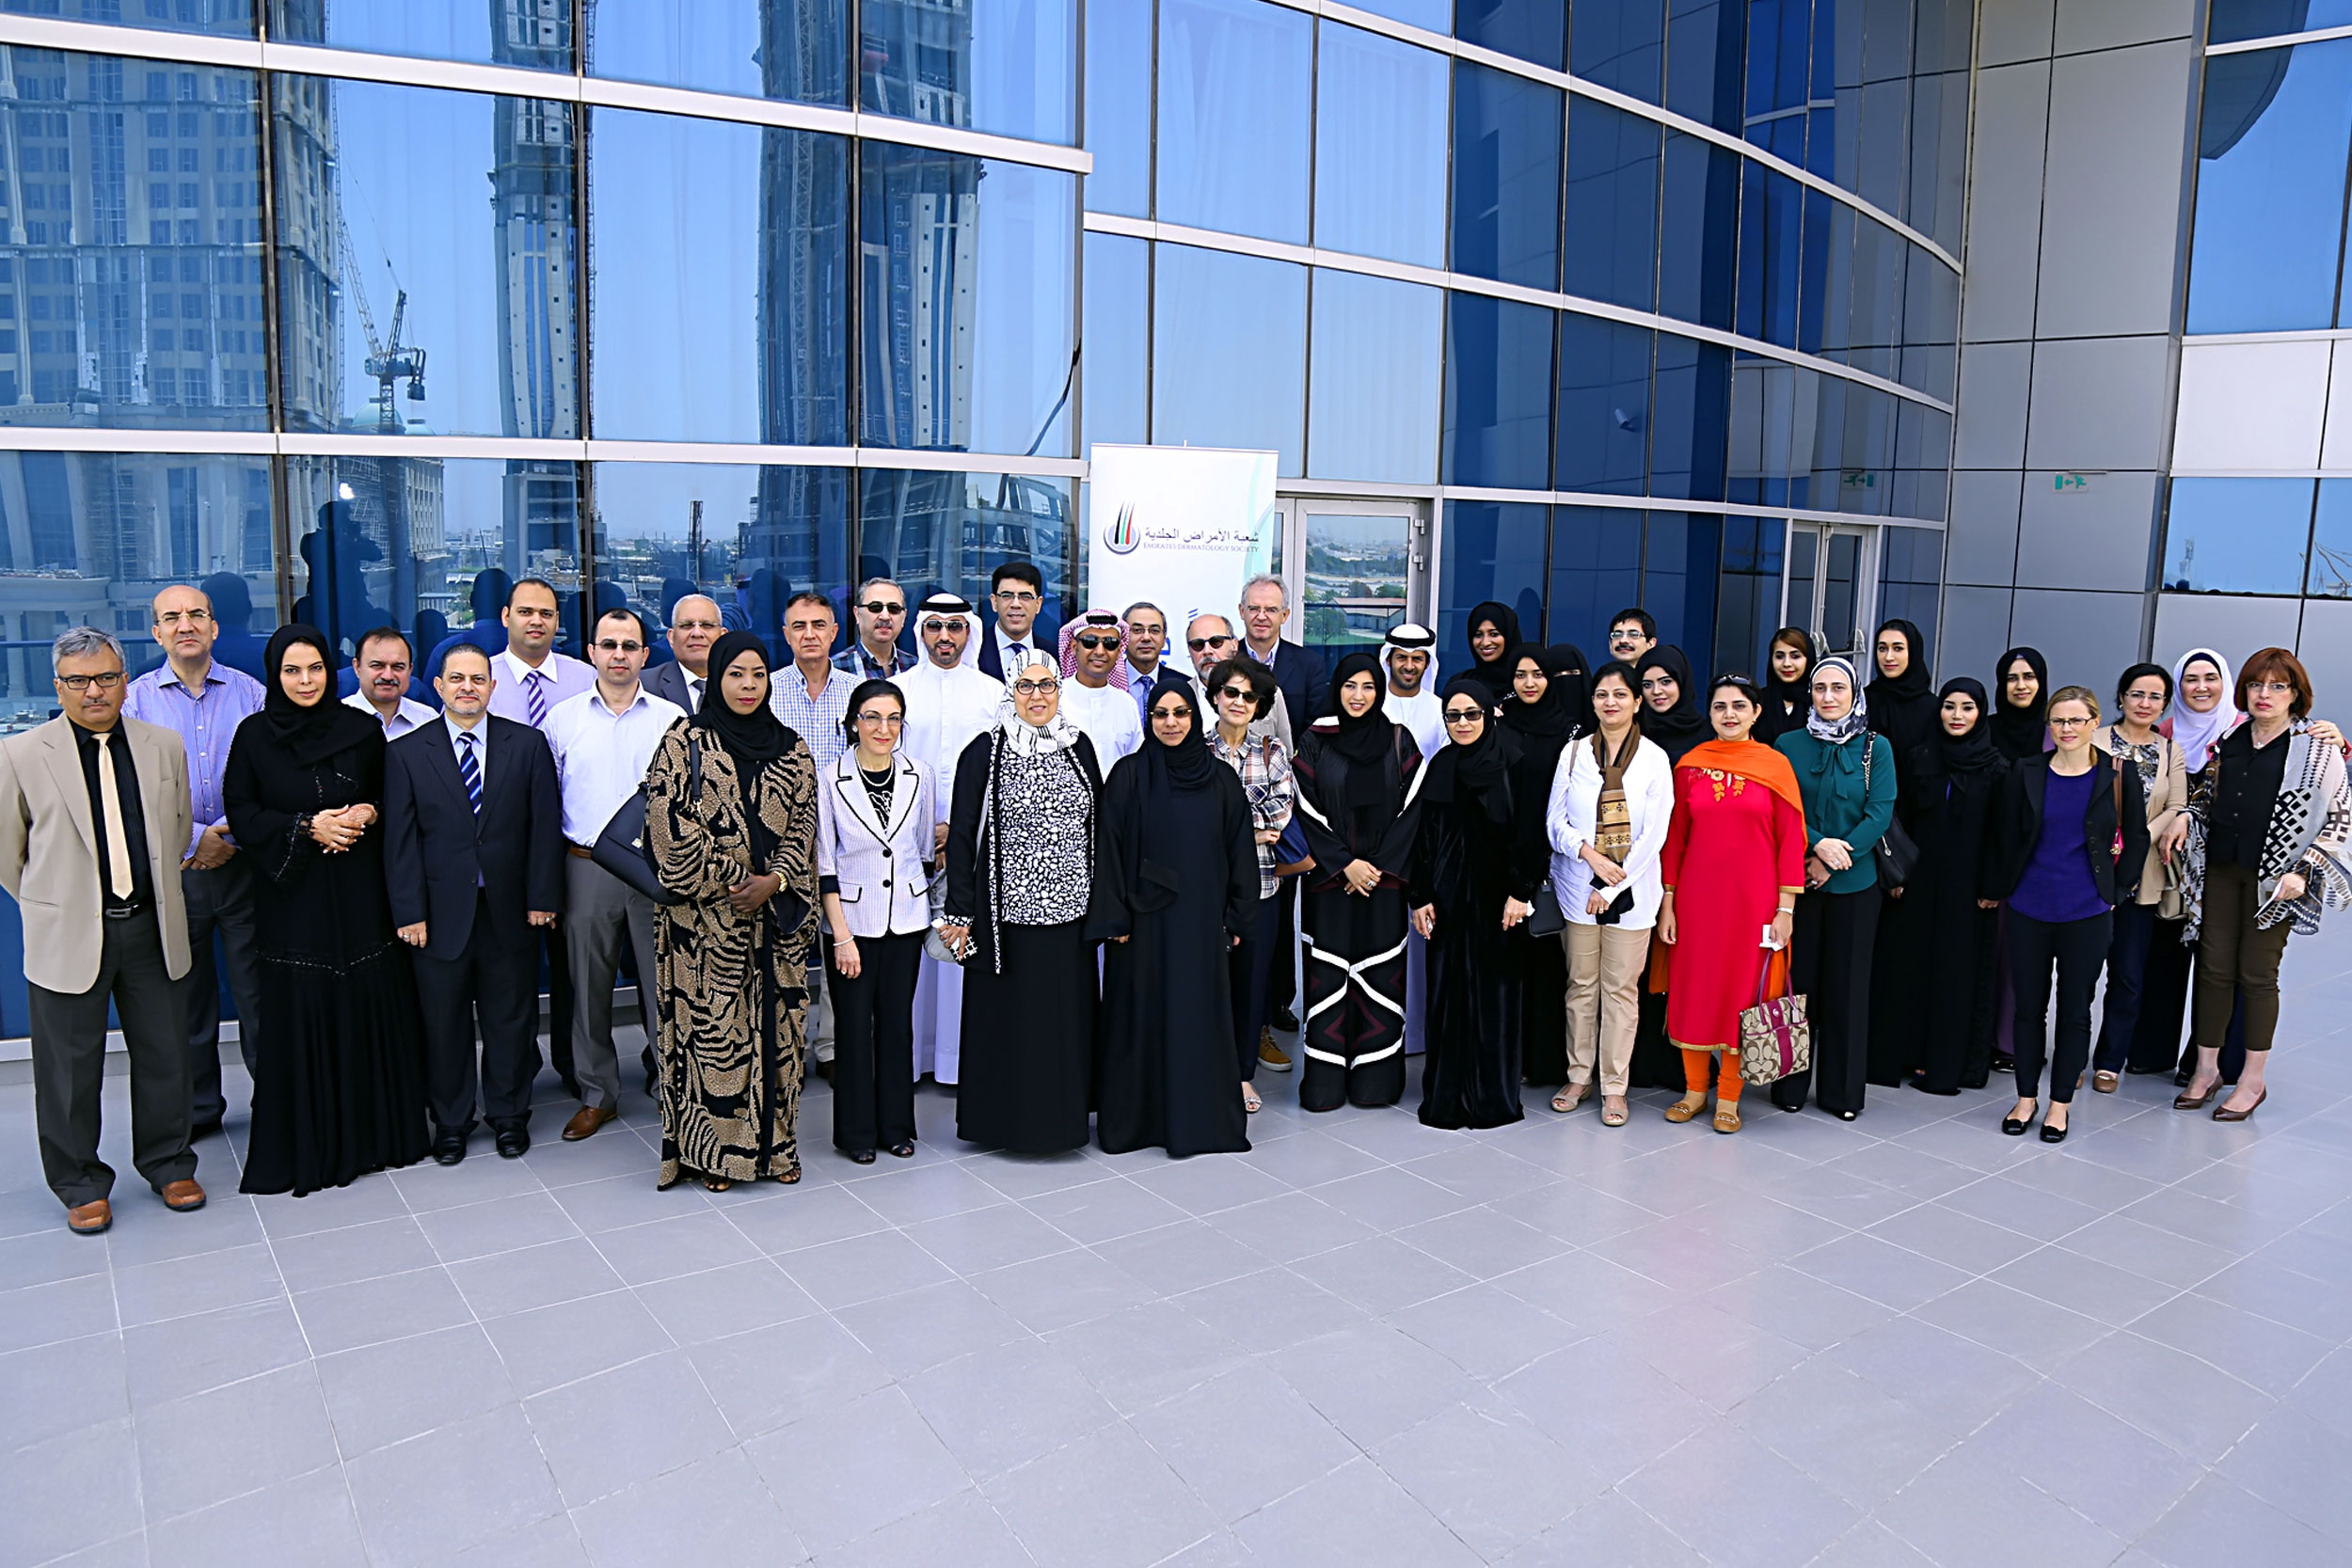 It brings together the dermatologist in the UAE so they can share their experiences and knowledge with their colleagues